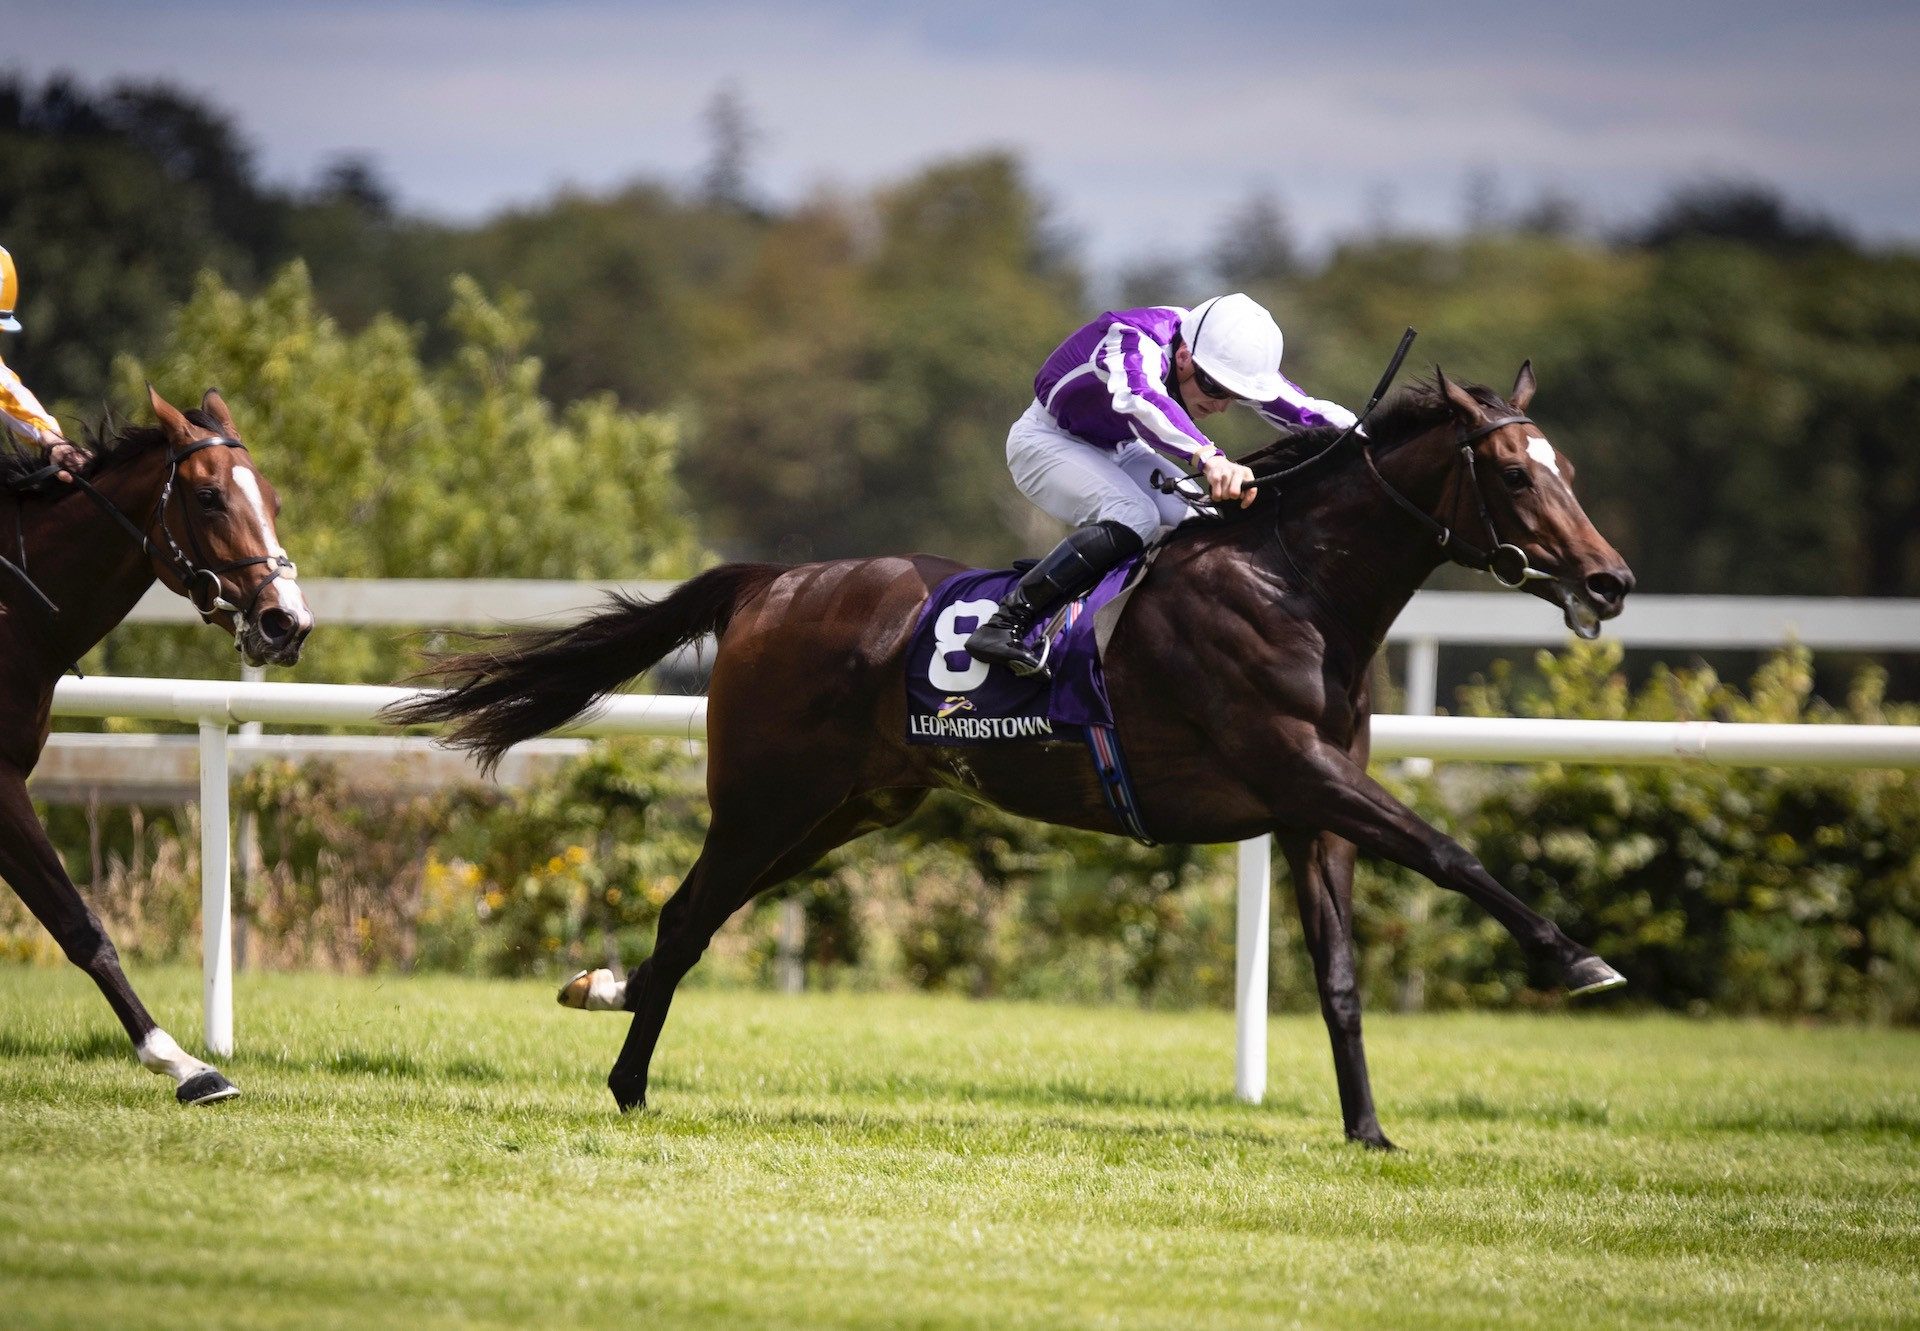 Shale (Galileo) Wins The Group 3 Silver Flash Stakes at Leopardstown